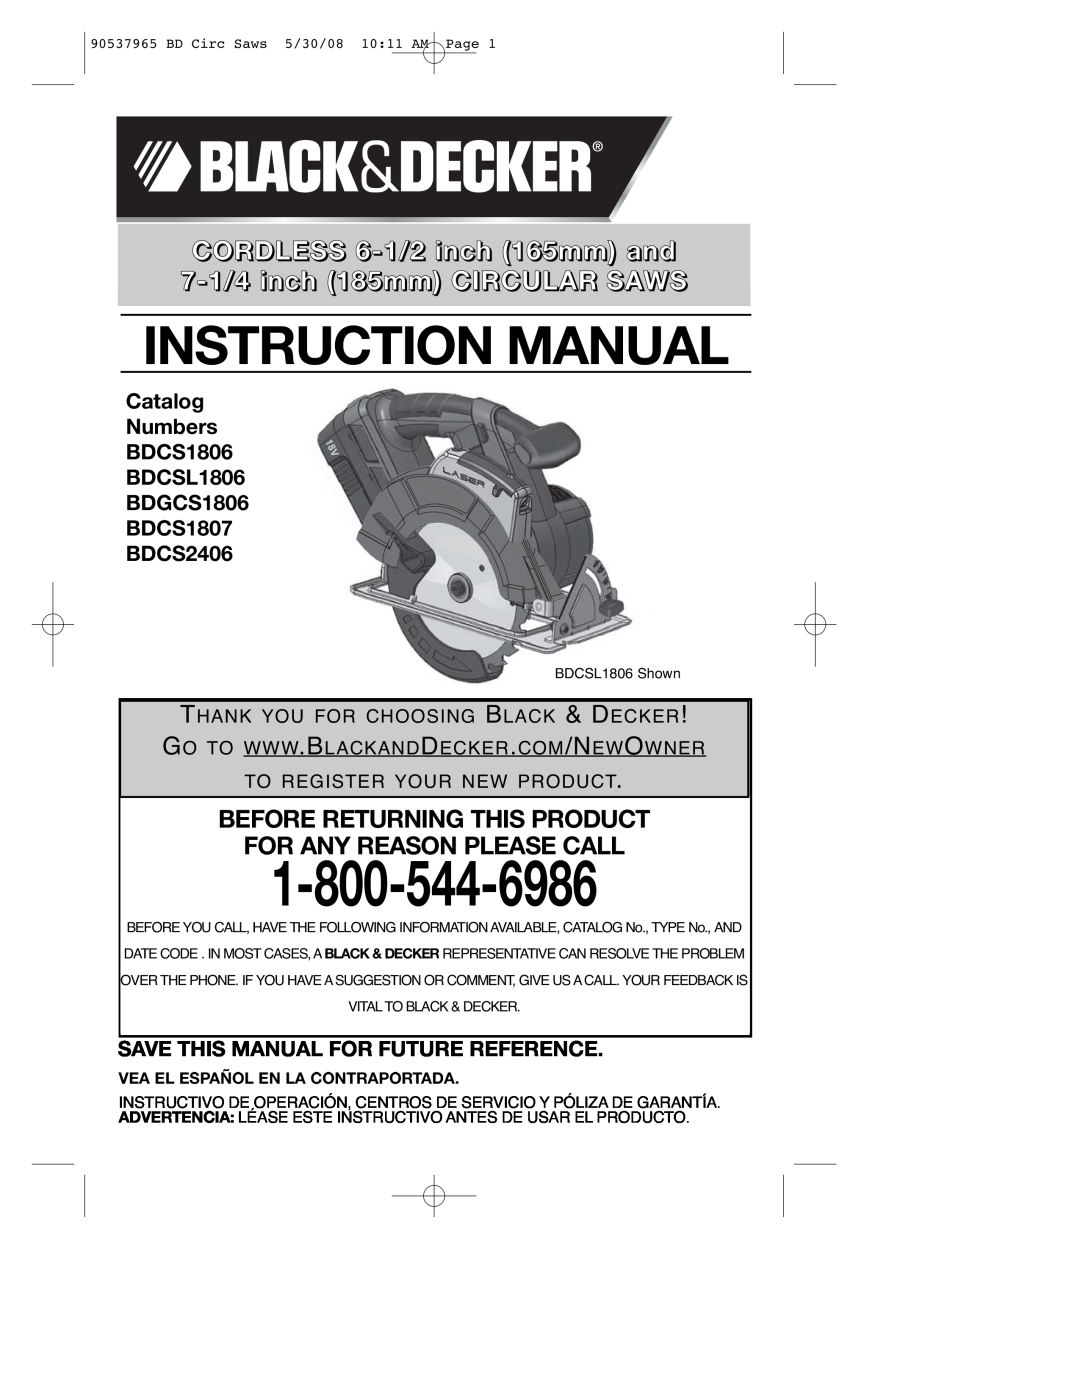 Black & Decker BDCS1806 instruction manual Instruction Manual, Before Returning This Product For Any Reason Please Call 